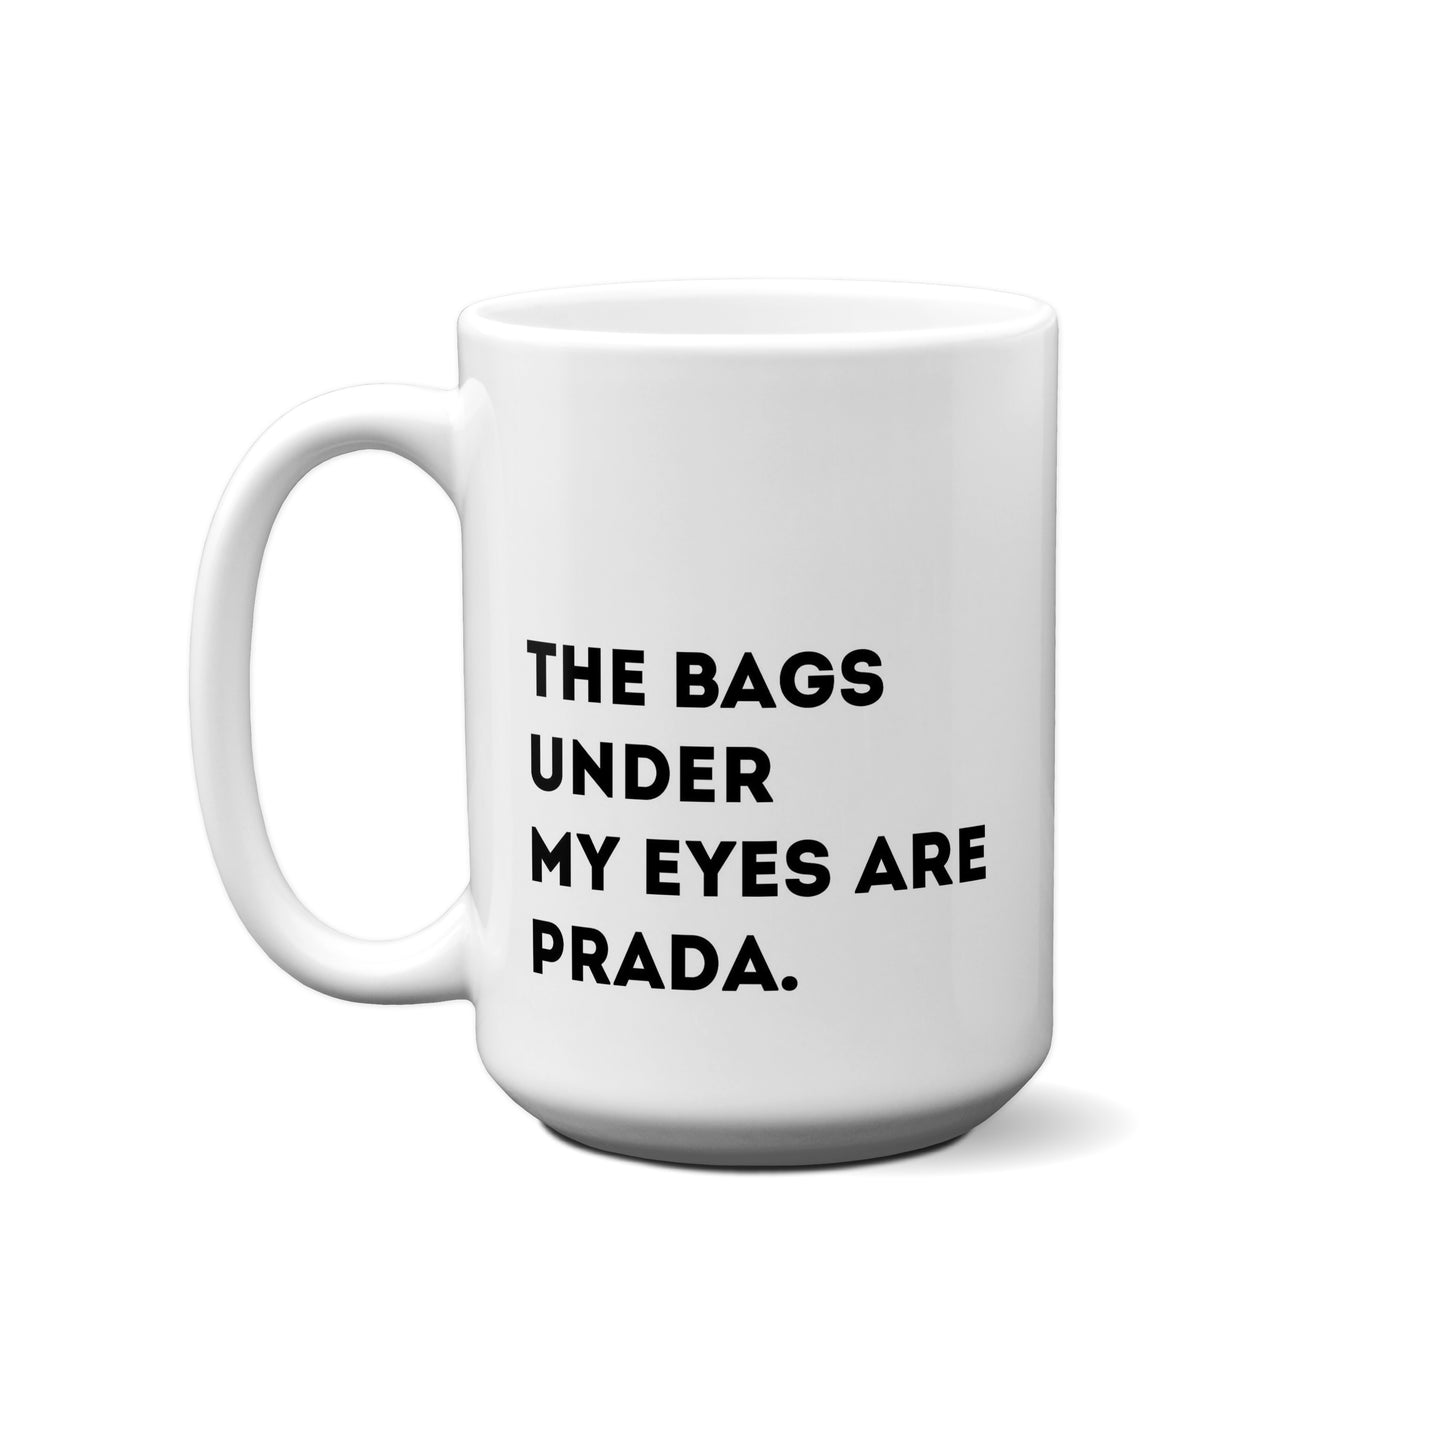 The Bags Under My Eyes Are Prada. Quote Mug